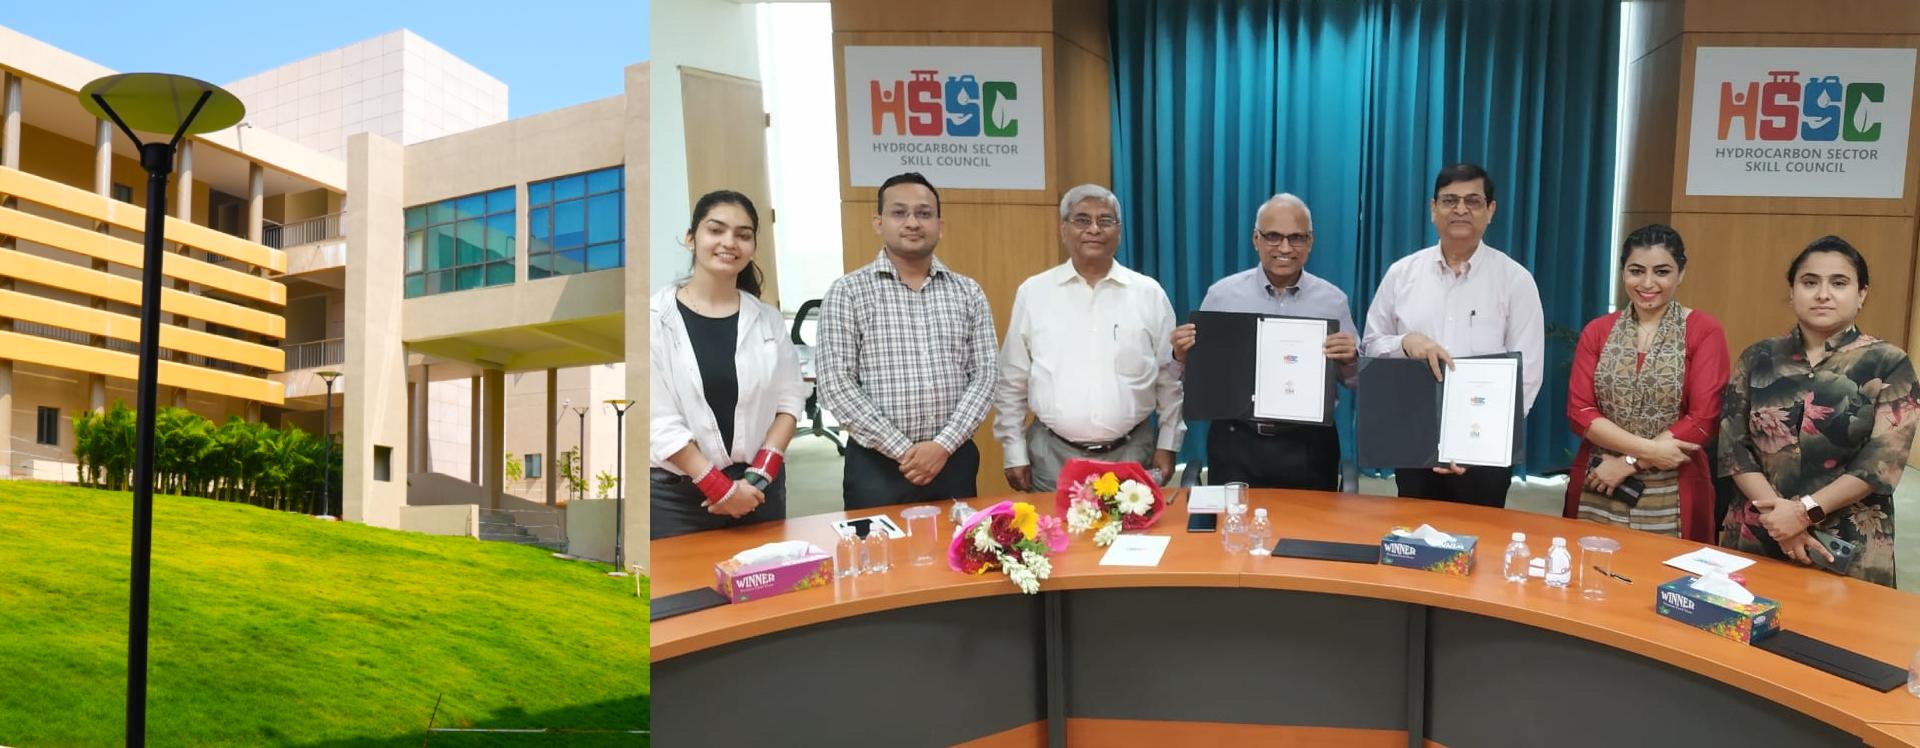 Indian Institute of Management Visakhapatnam (IIMV) and Hydrocarbon Sector Skill Council (HSSC) entered into a Memorandum of Understanding on 19/8/2023